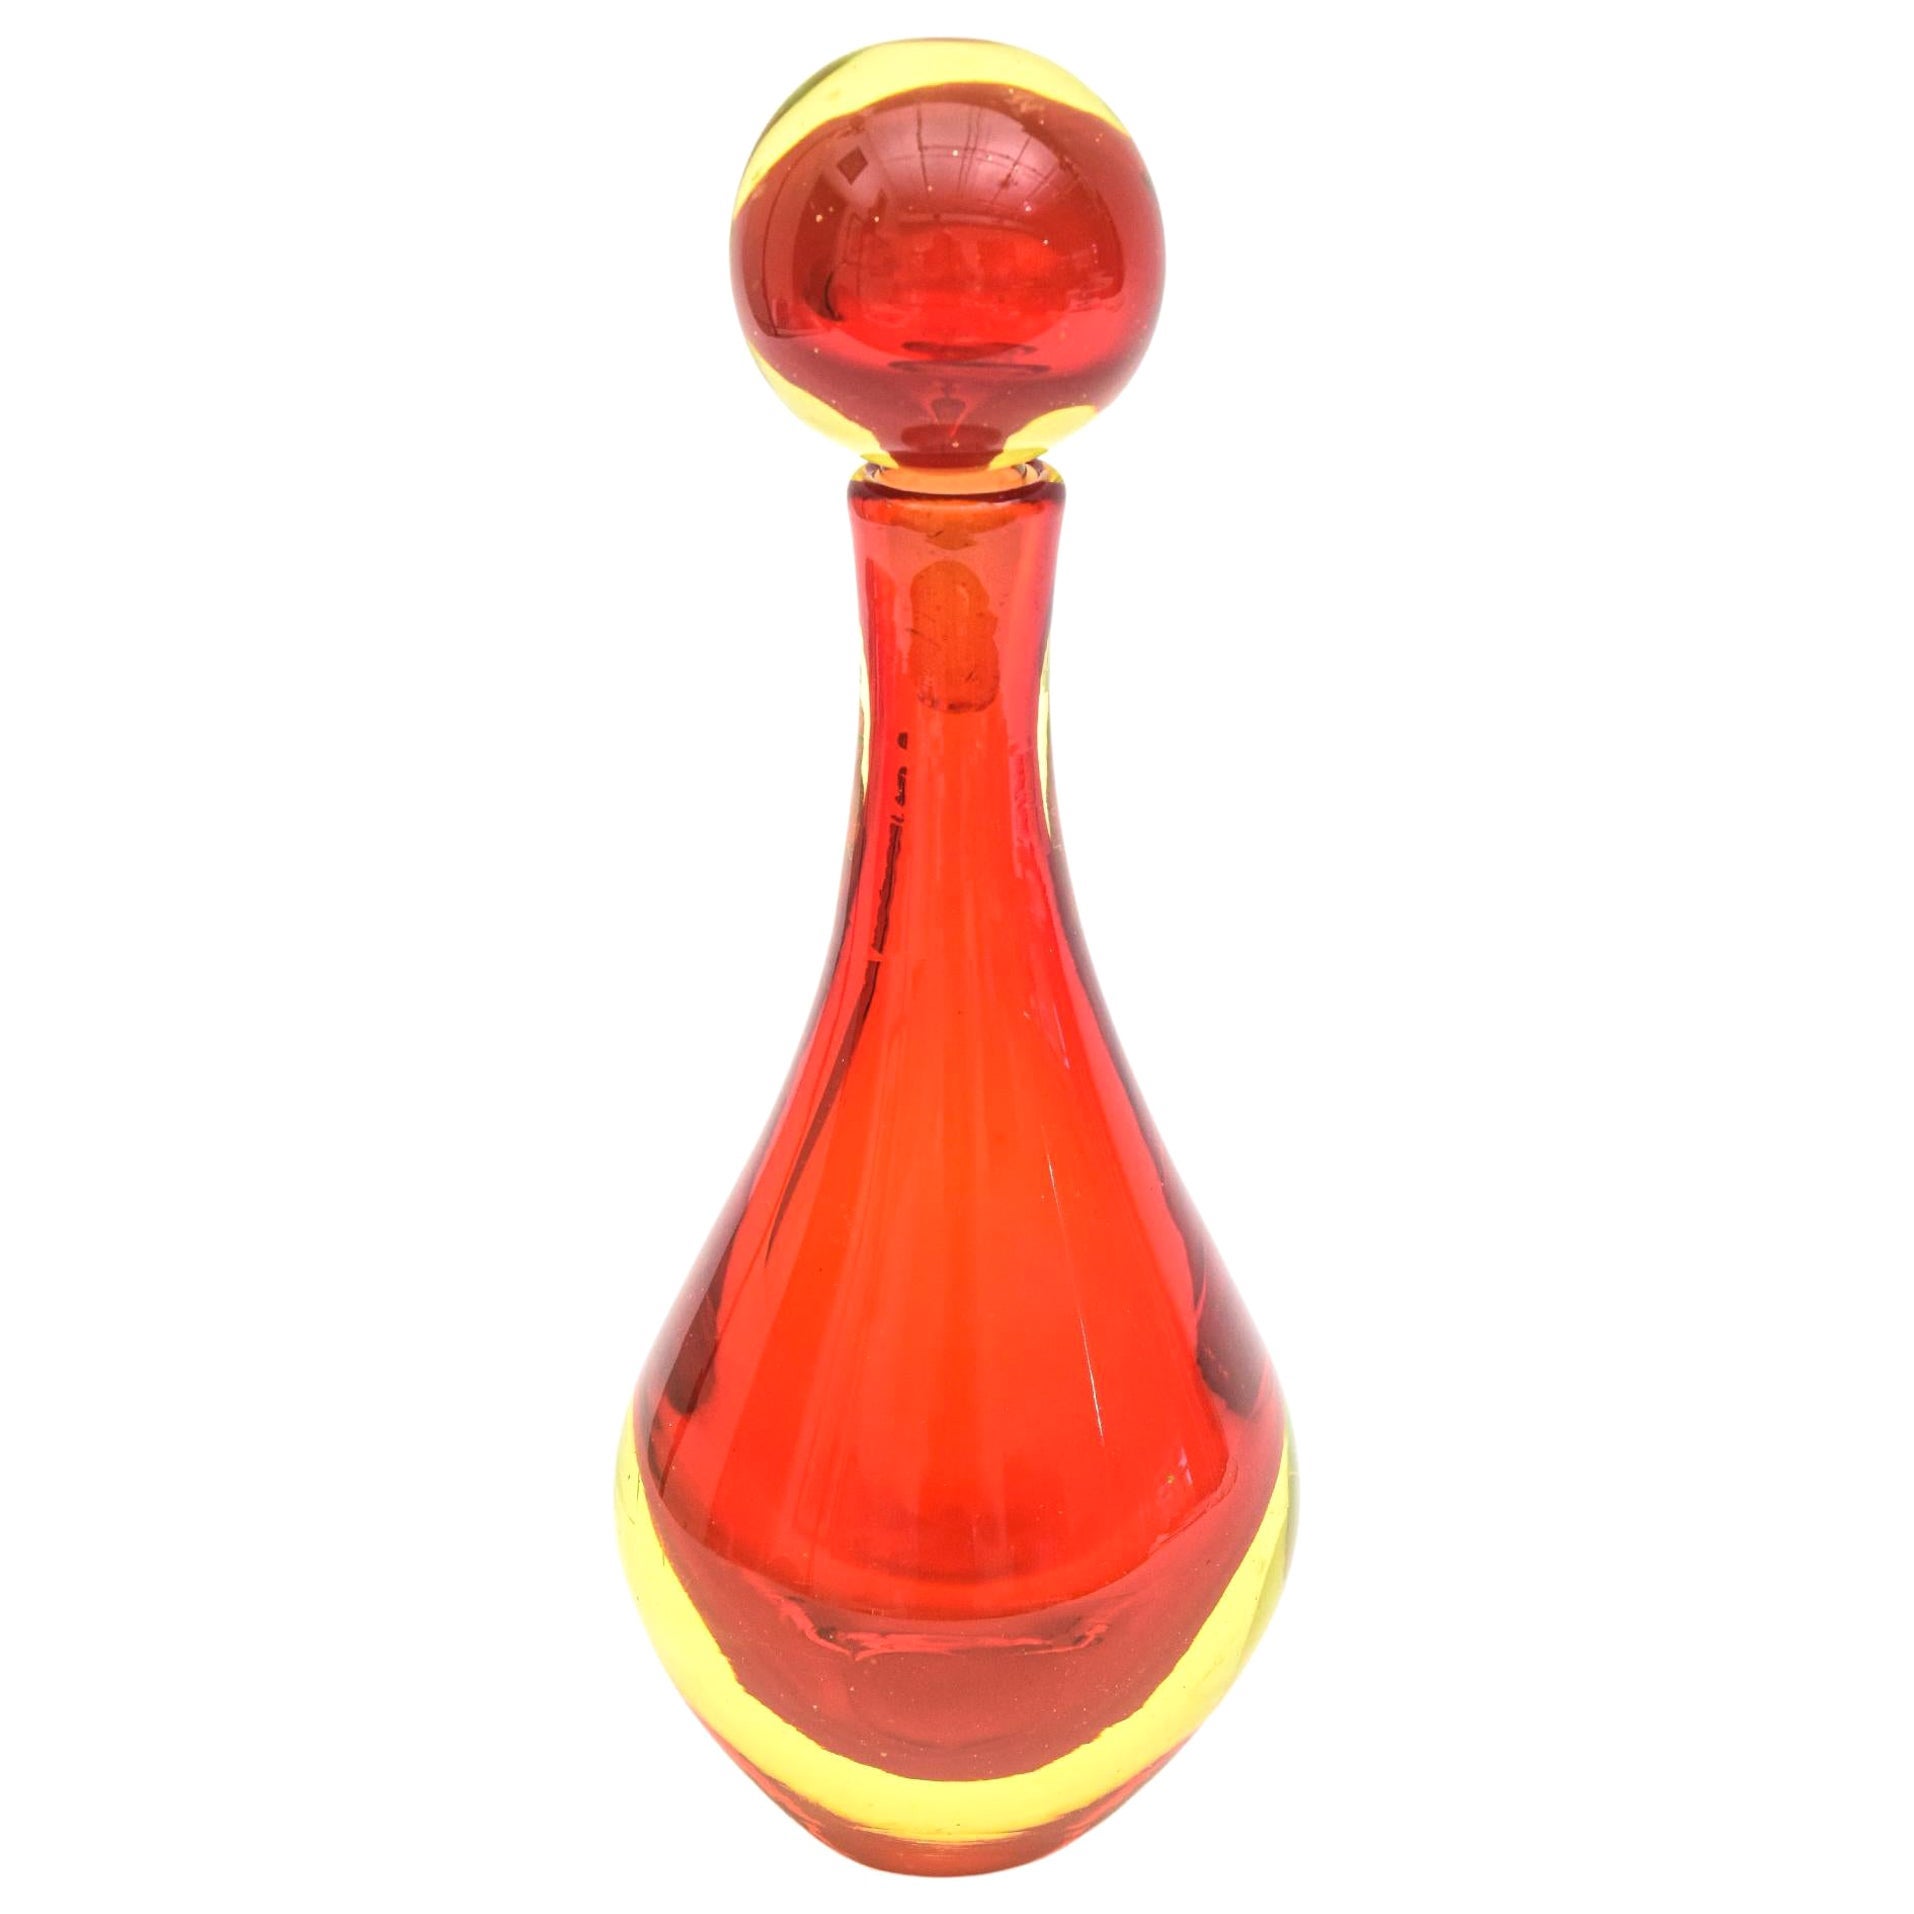 Antonio da Ros for Cenedese Murano Sommerso Red Yellow Glass Decanter Bottle